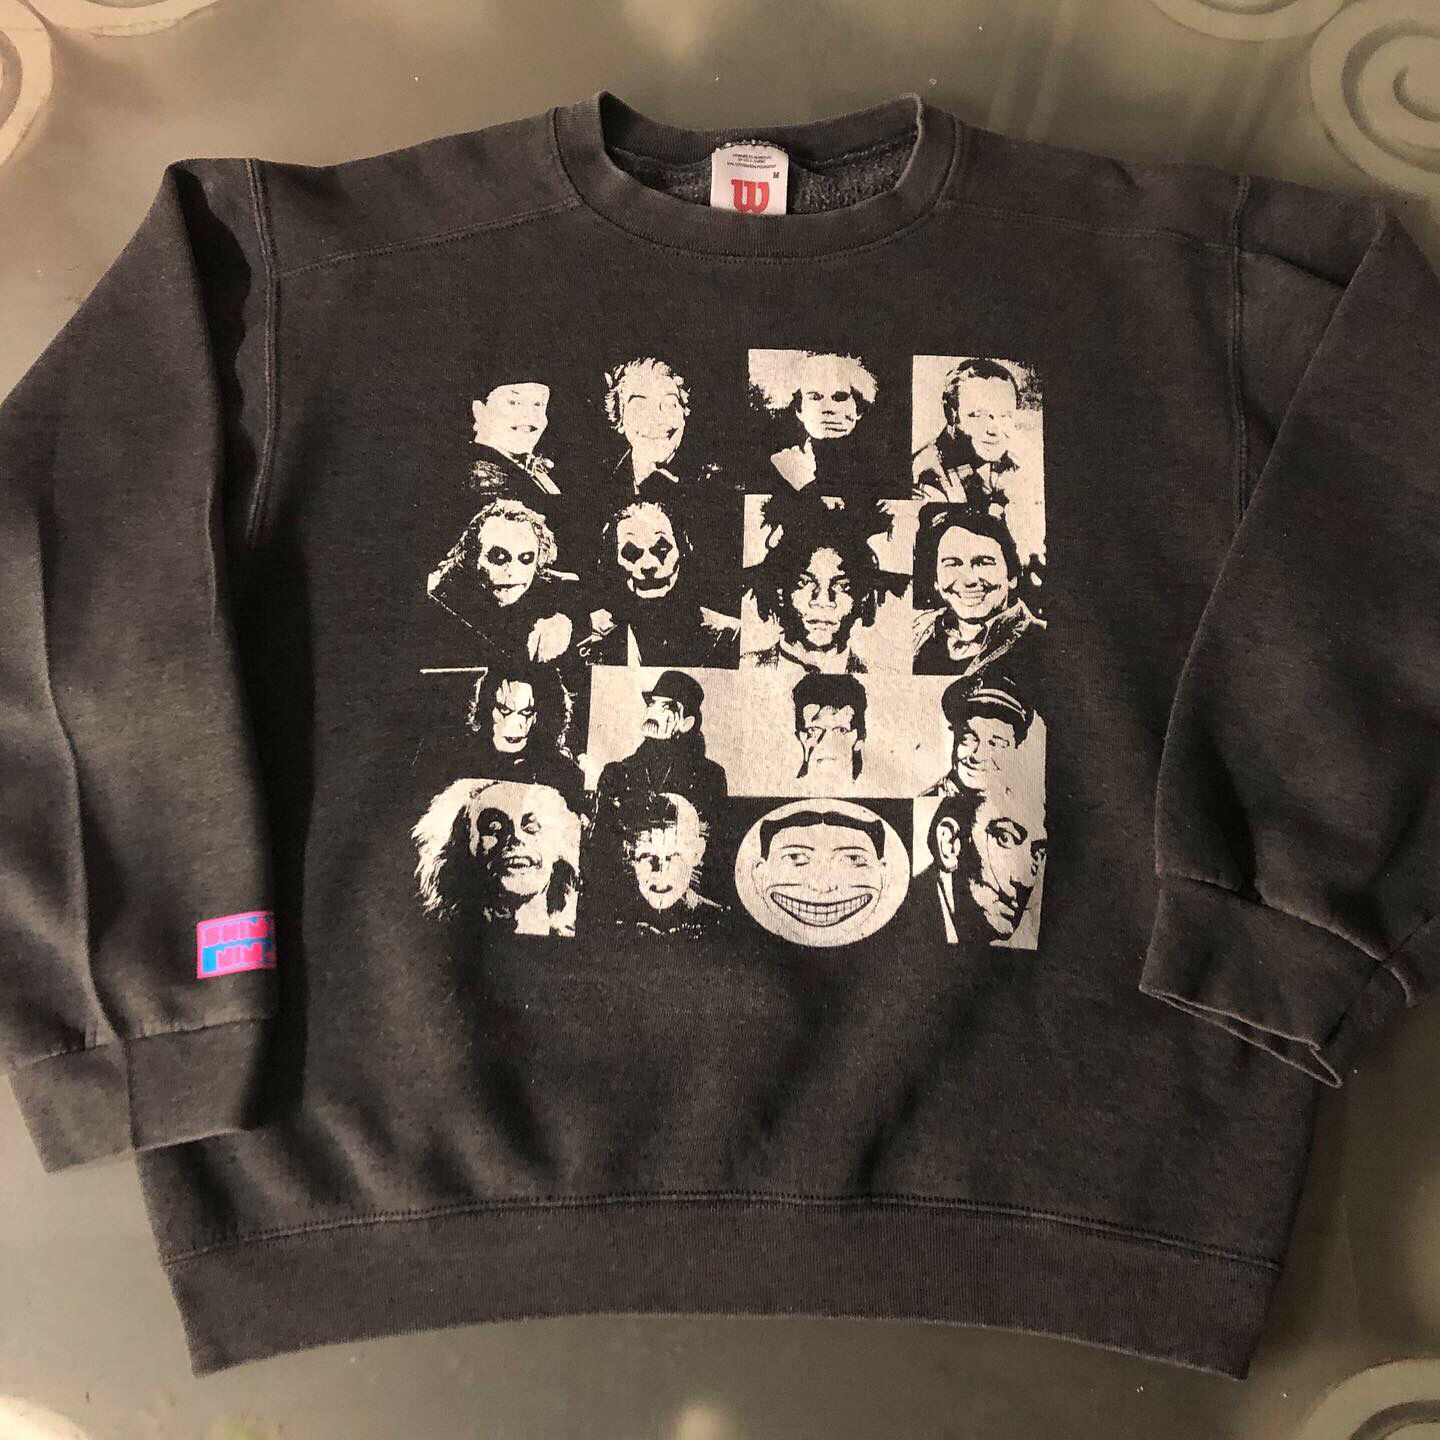 People Collage First Edition Sweater (Medium) Basquiat Bowie The Joker The Crow & More